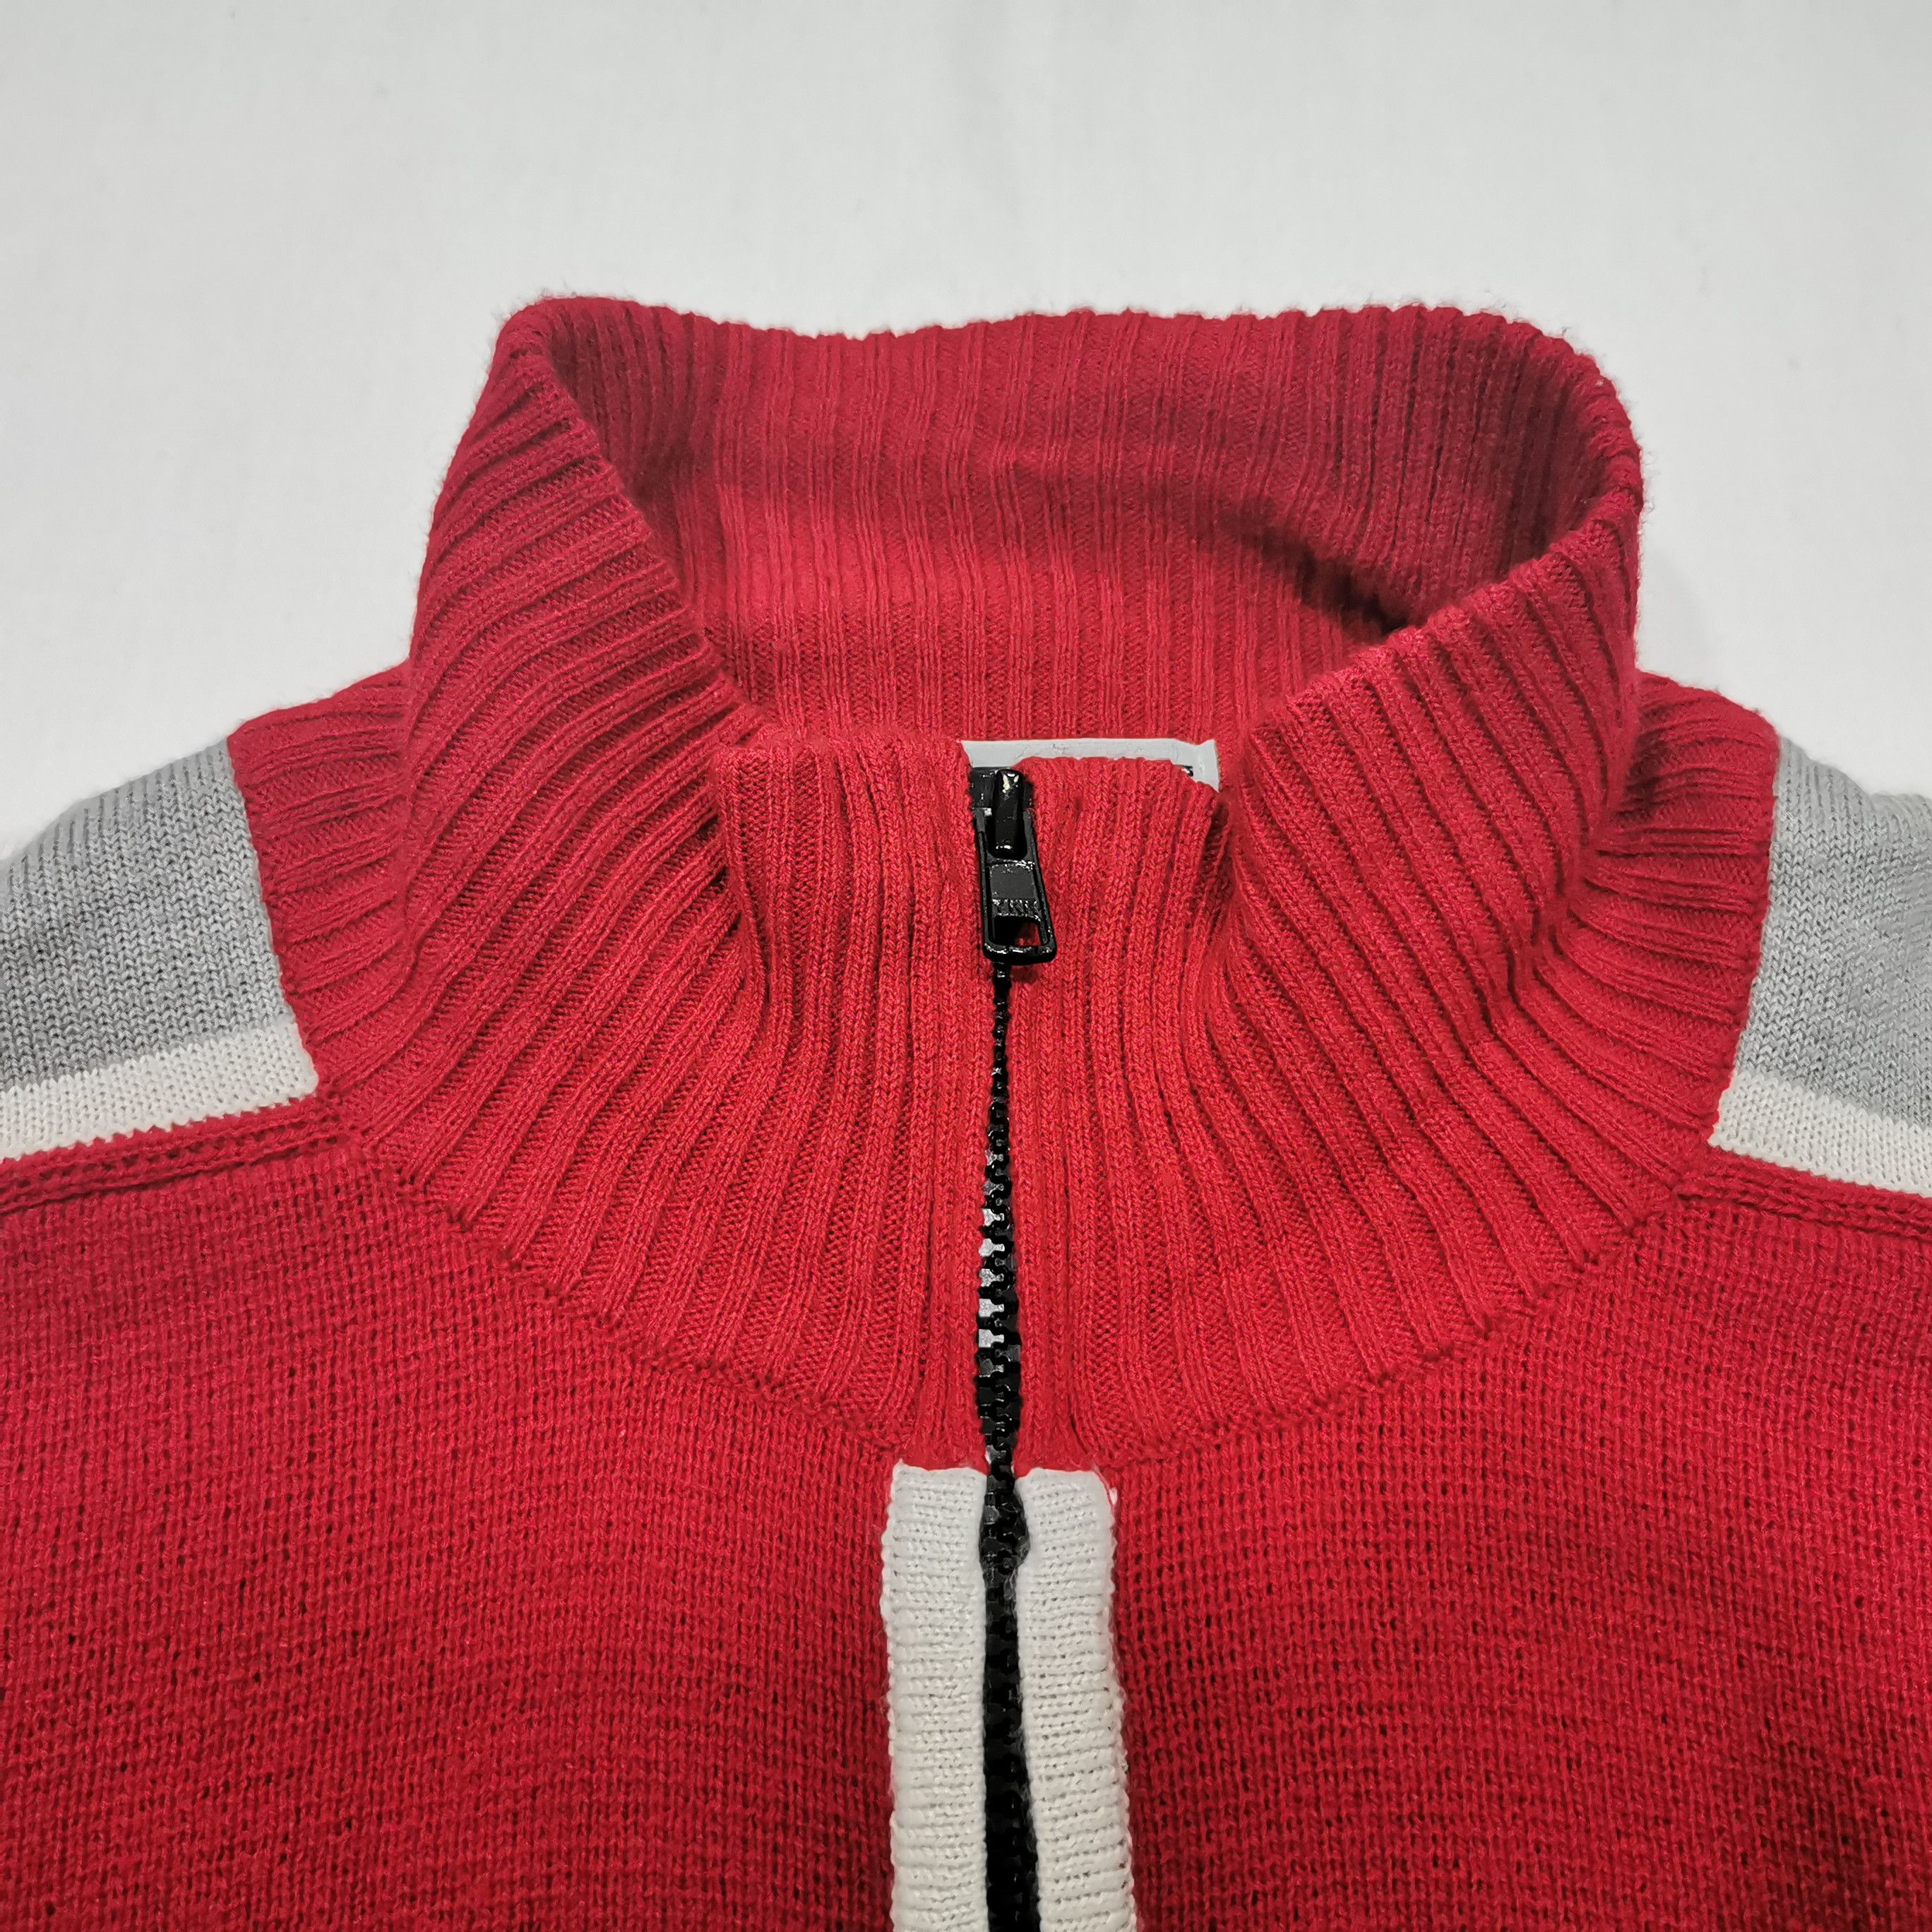 Vintage Vision Street Wear Knitted Sweaters - 4